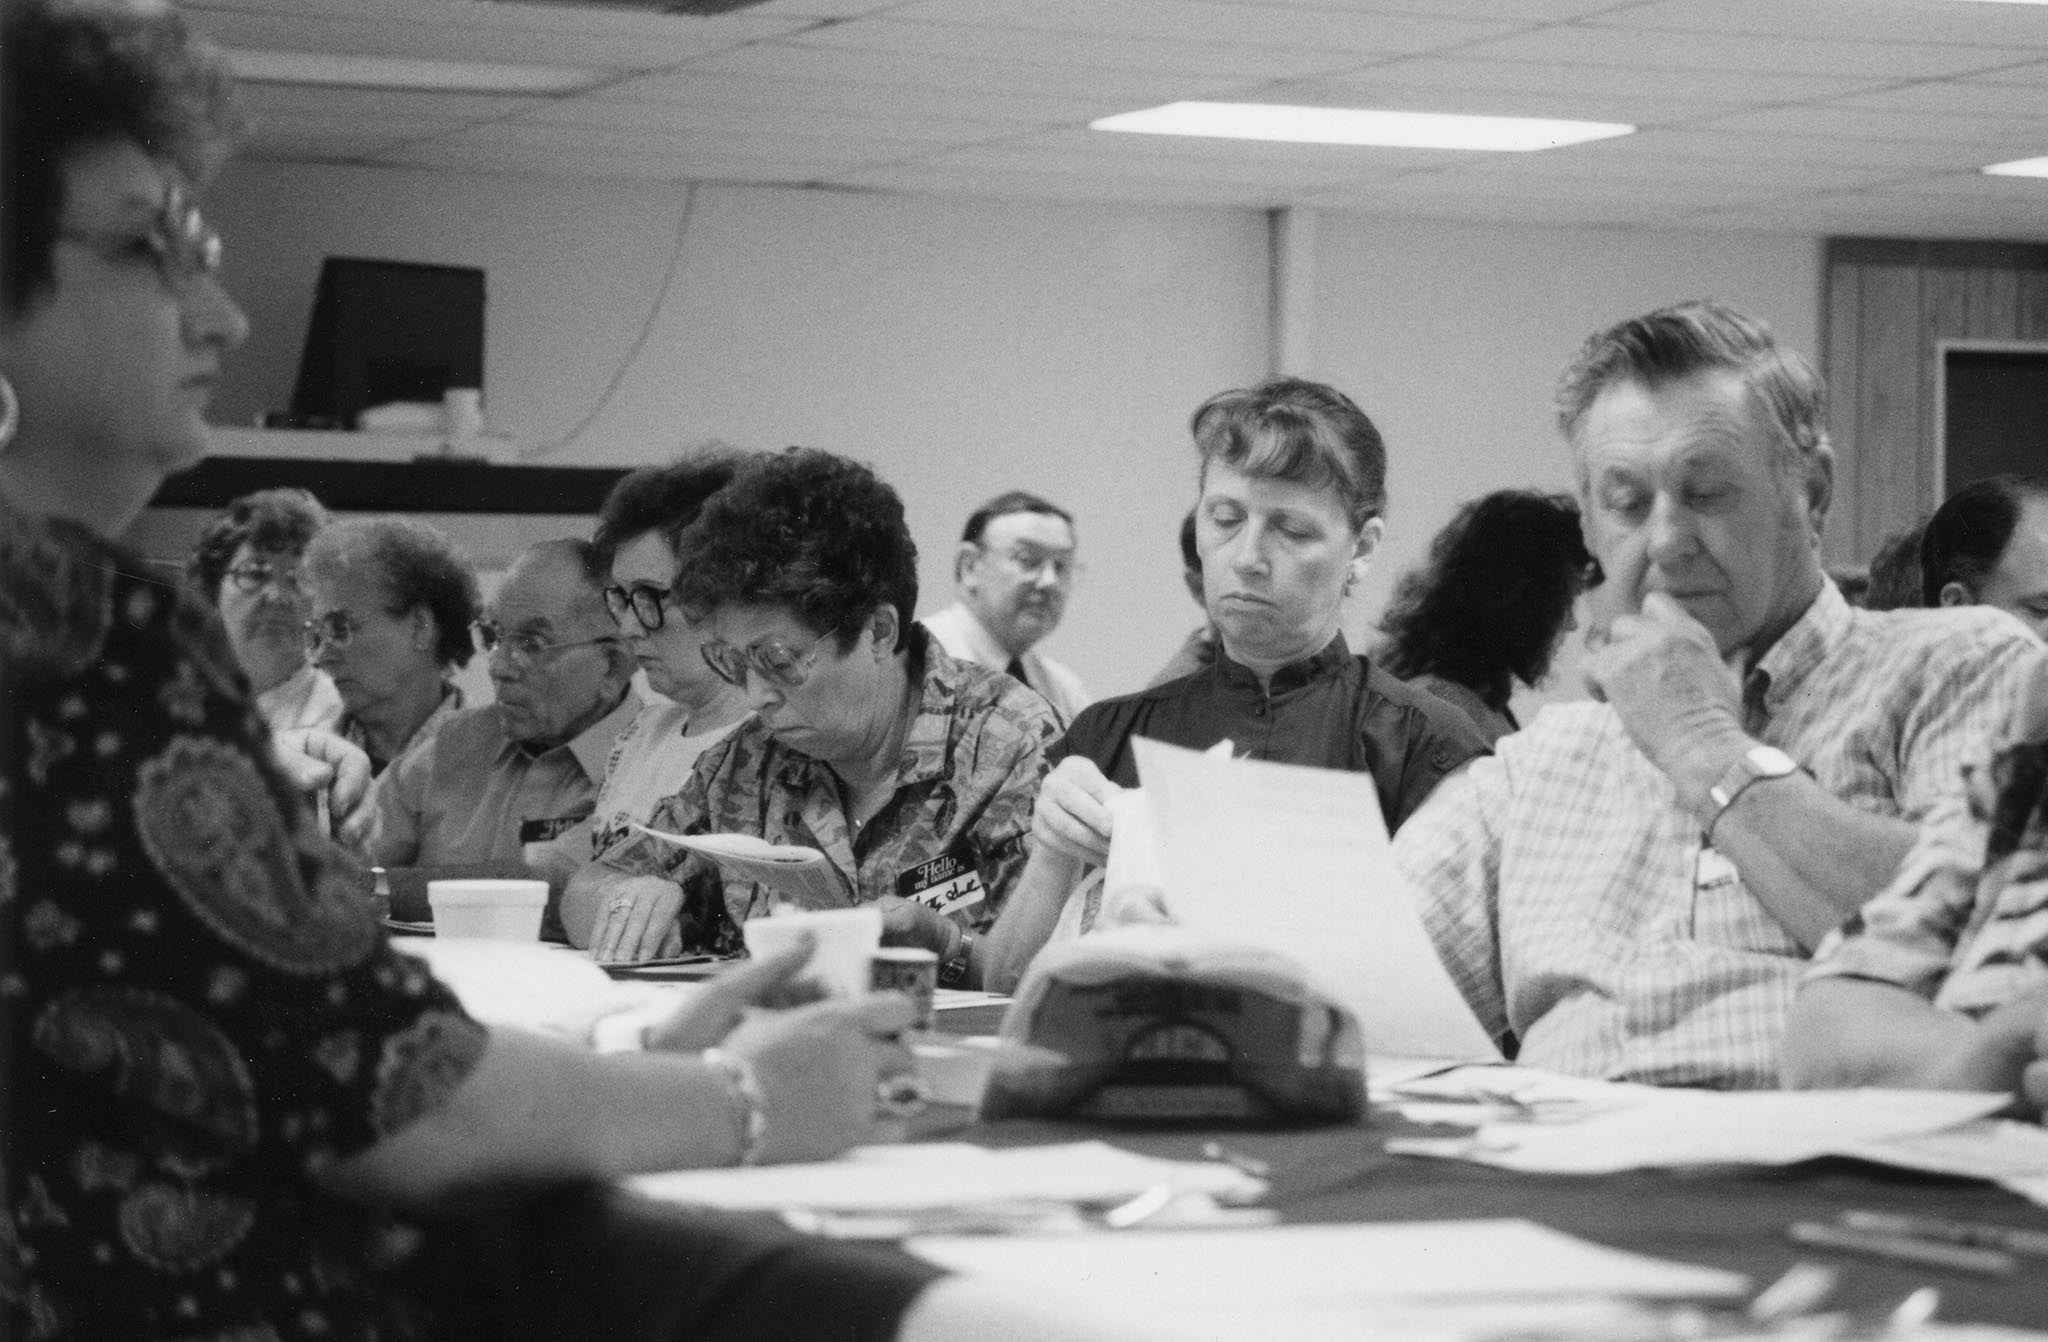 Area meetings in 1990 focused mainly on education funding and the possible sale of school land. Nearly 600 recommendations were submitted to the Oklahoma Farm Bureau State Resolutions Committee that year, concerning a variety of other topics, such as a possible state environmental agency, accountability in government, annexation and land-use planning. Area meetings continue to serve as the kickoff of the grassroots effort to establish Farm Bureau policy in areas of concern to Oklahoma farmers and ranchers.